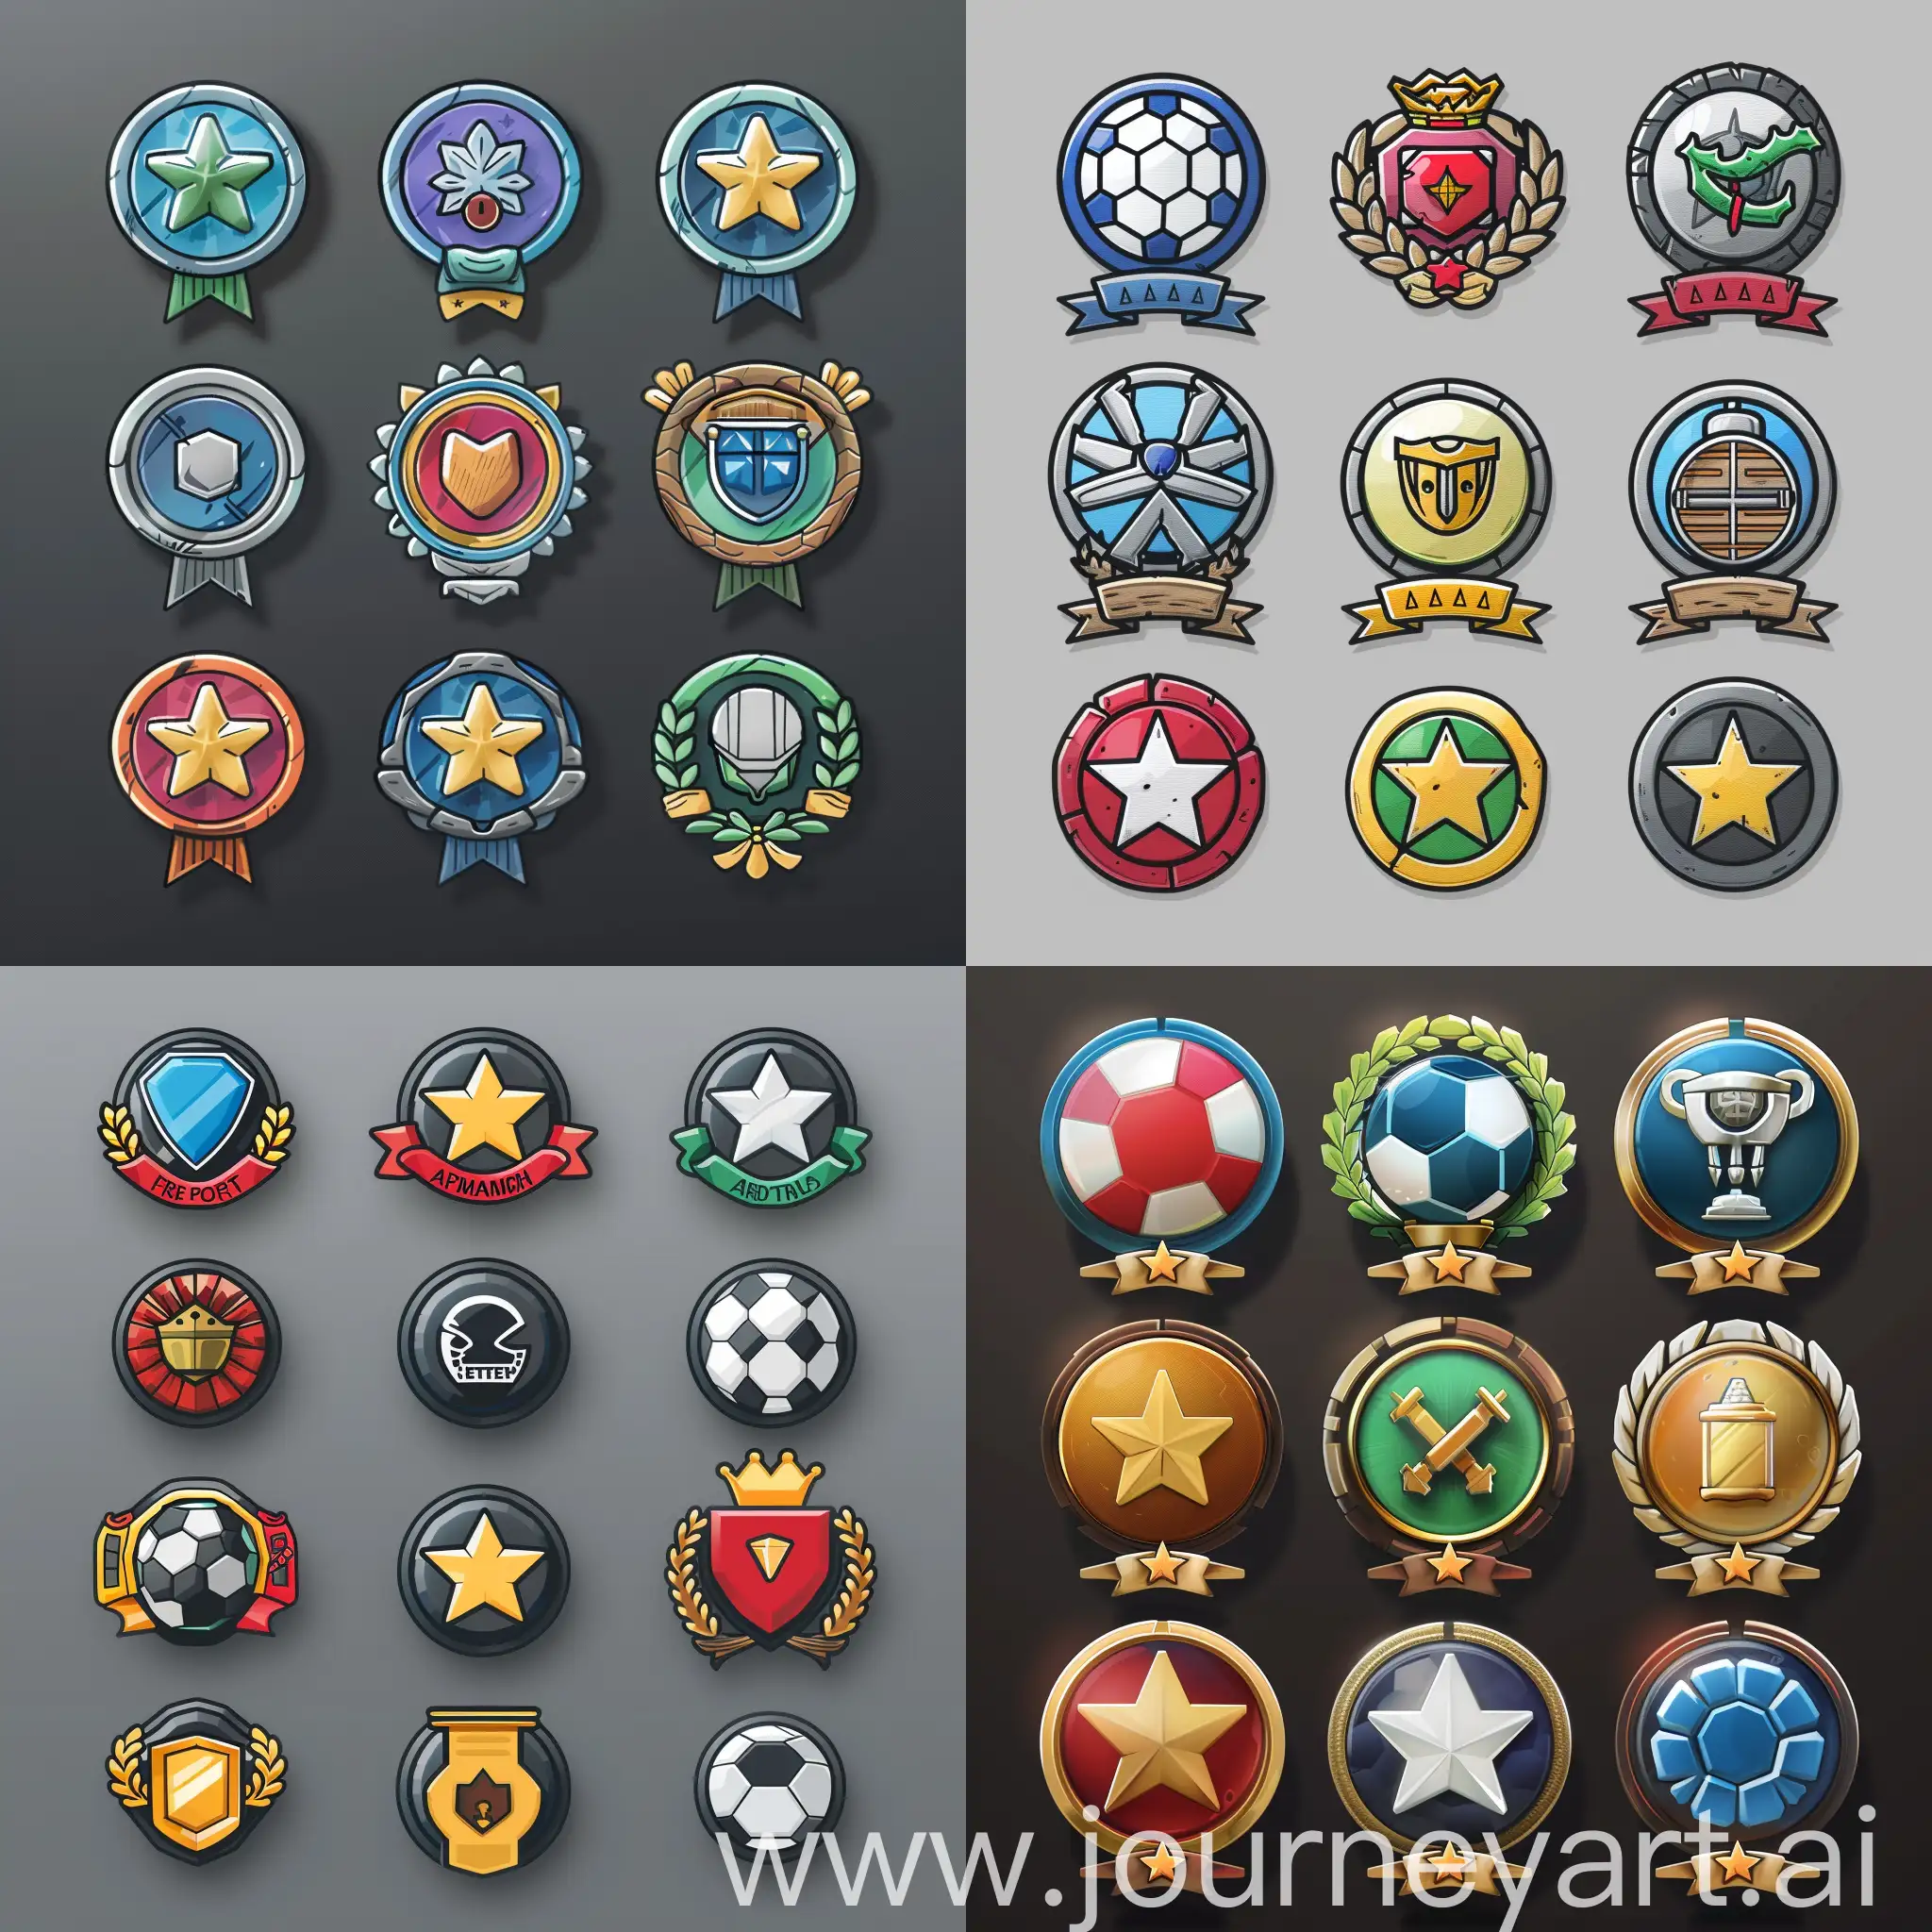 Free-Sport-Achievement-Badges-Icon-Pack-New-Icons-for-Achievements